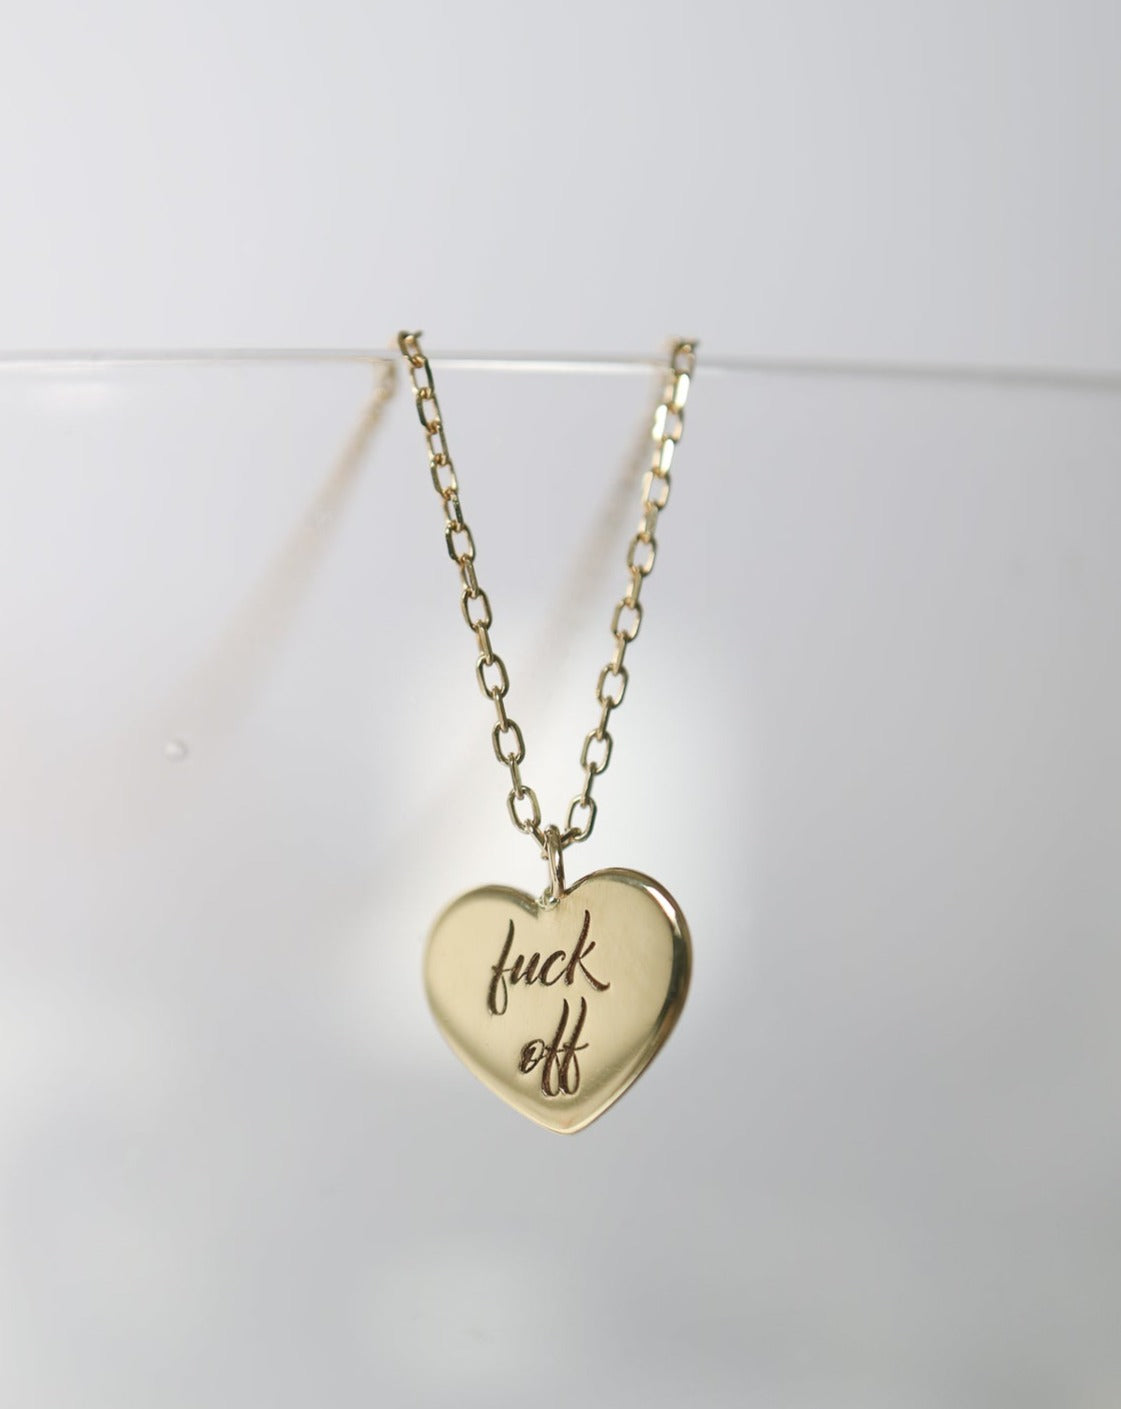 9kt gold Heart Pendant with "fuck off" engraved